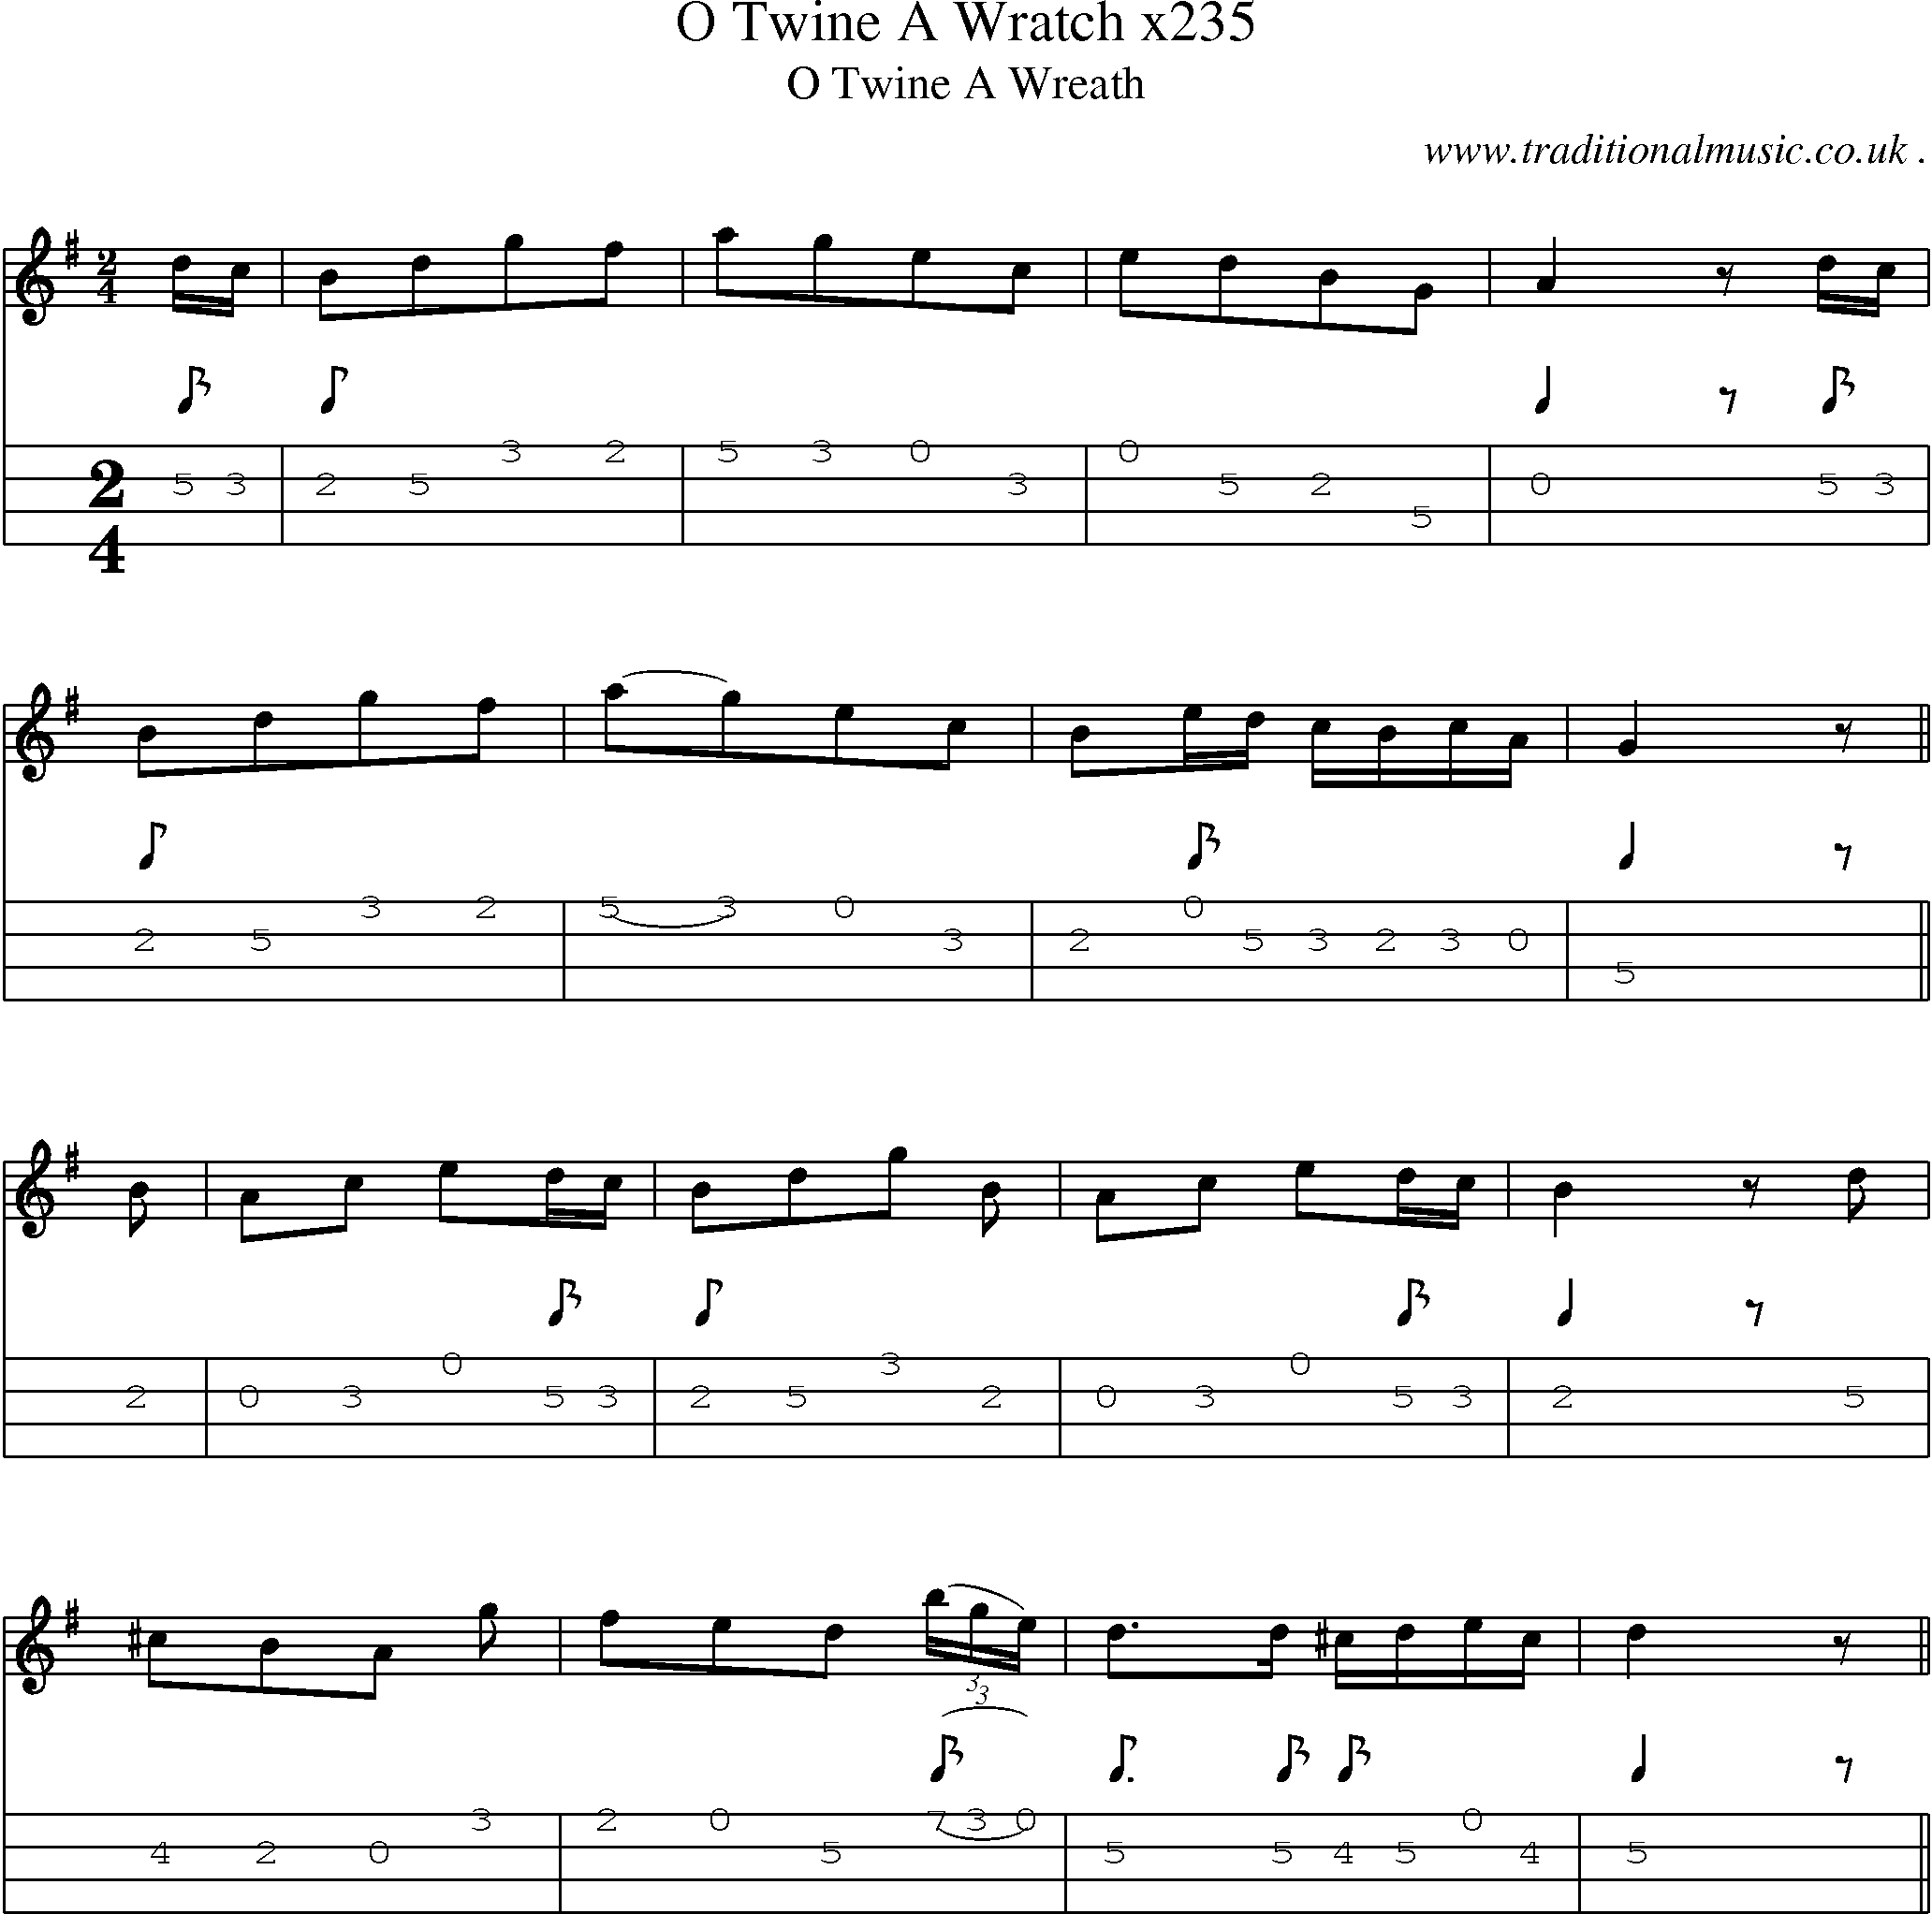 Sheet-Music and Mandolin Tabs for O Twine A Wratch X235